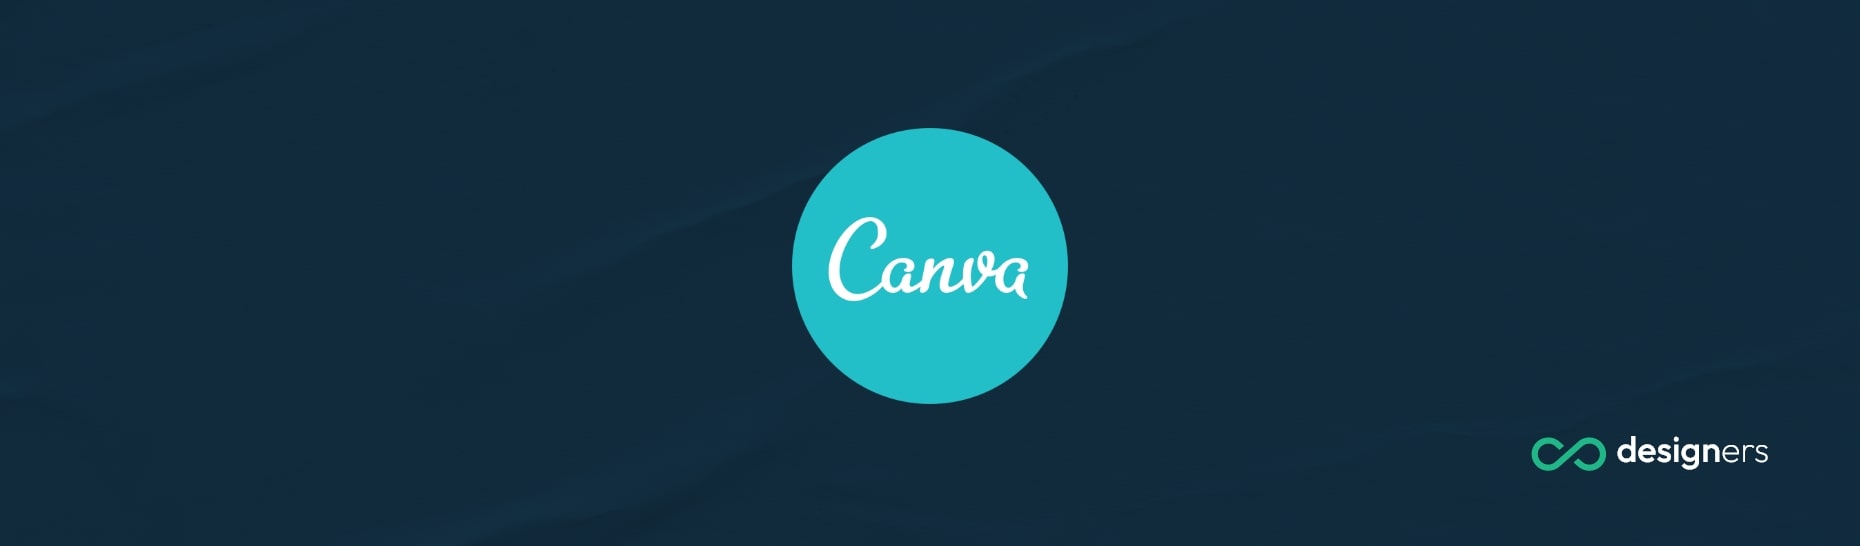 How Can I Download My Resume From Canva for Free?